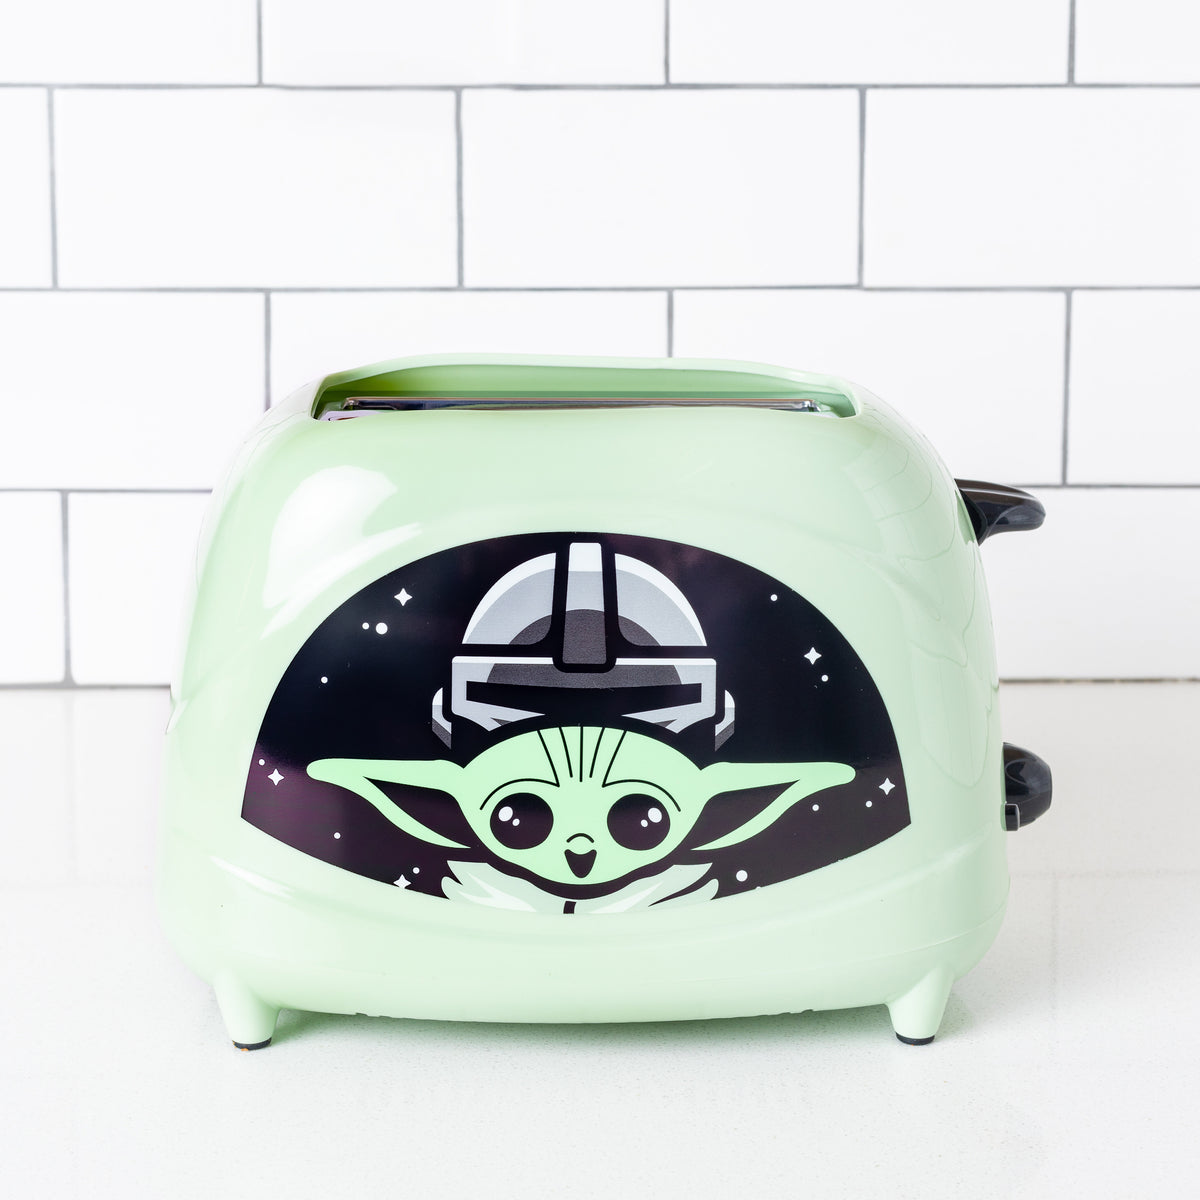 Star Wars The Mandalorian The Child Toaster